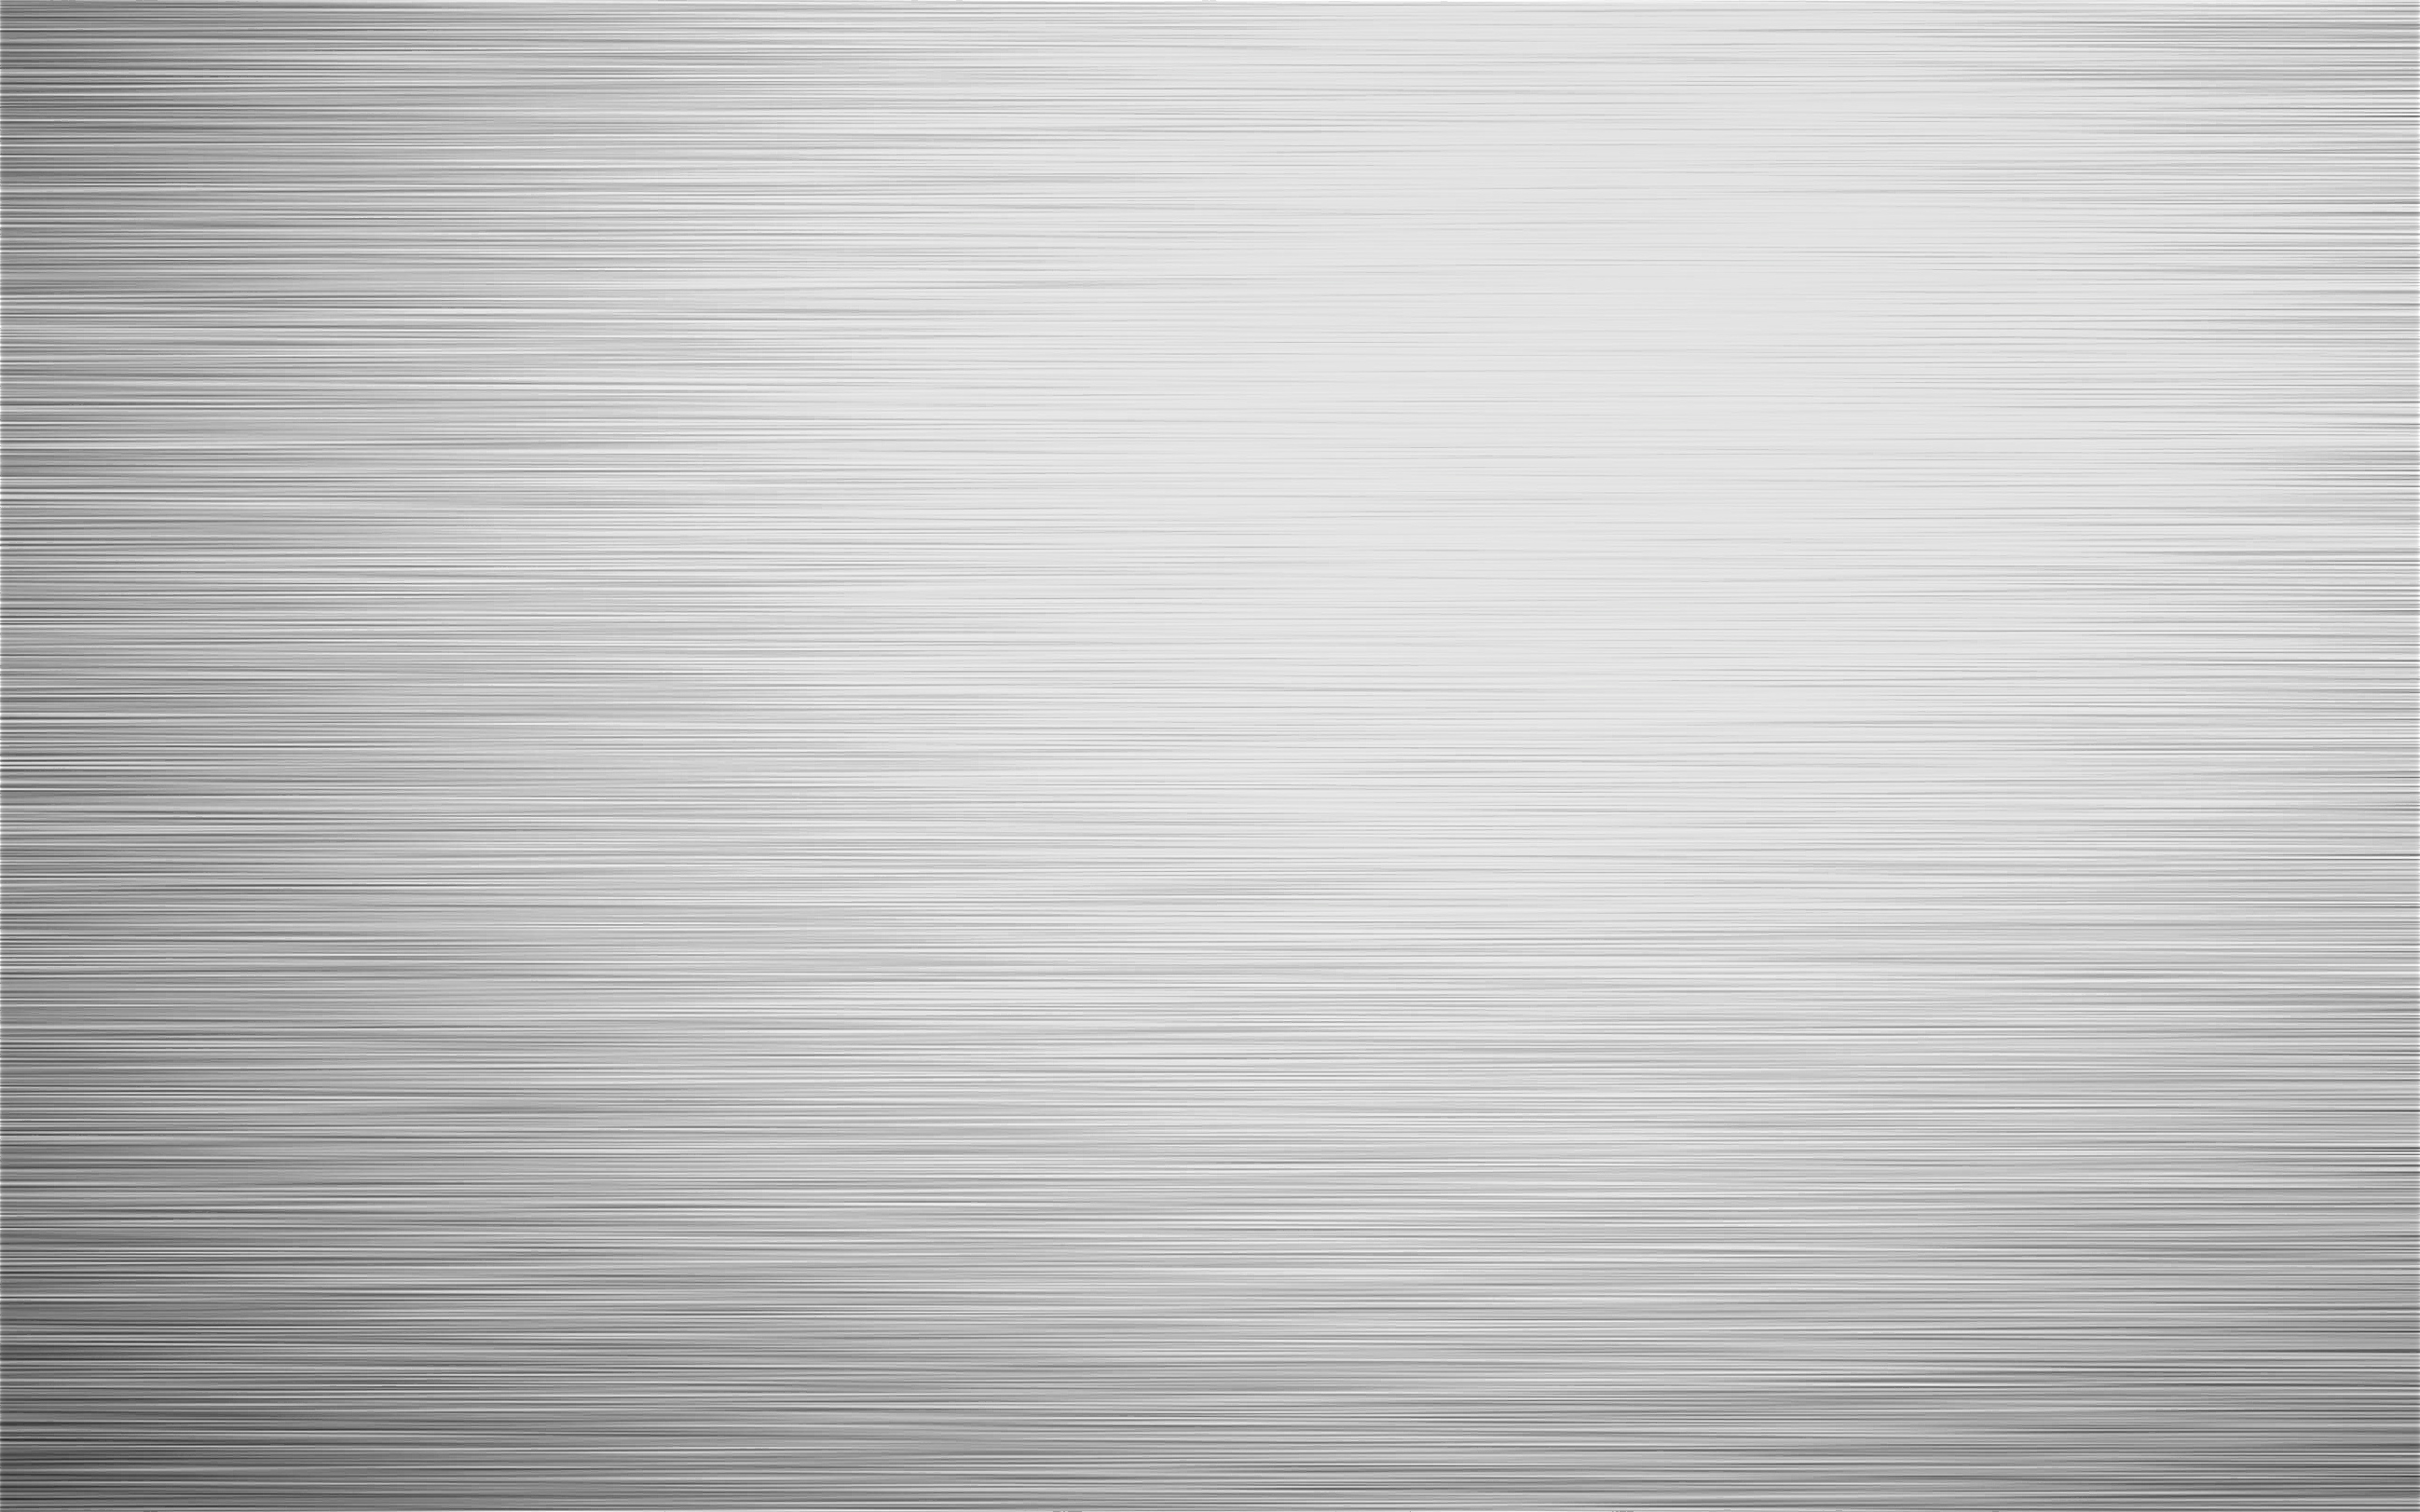 A Large Sheet Of Rendered Brushed Steel Or Metal As Background